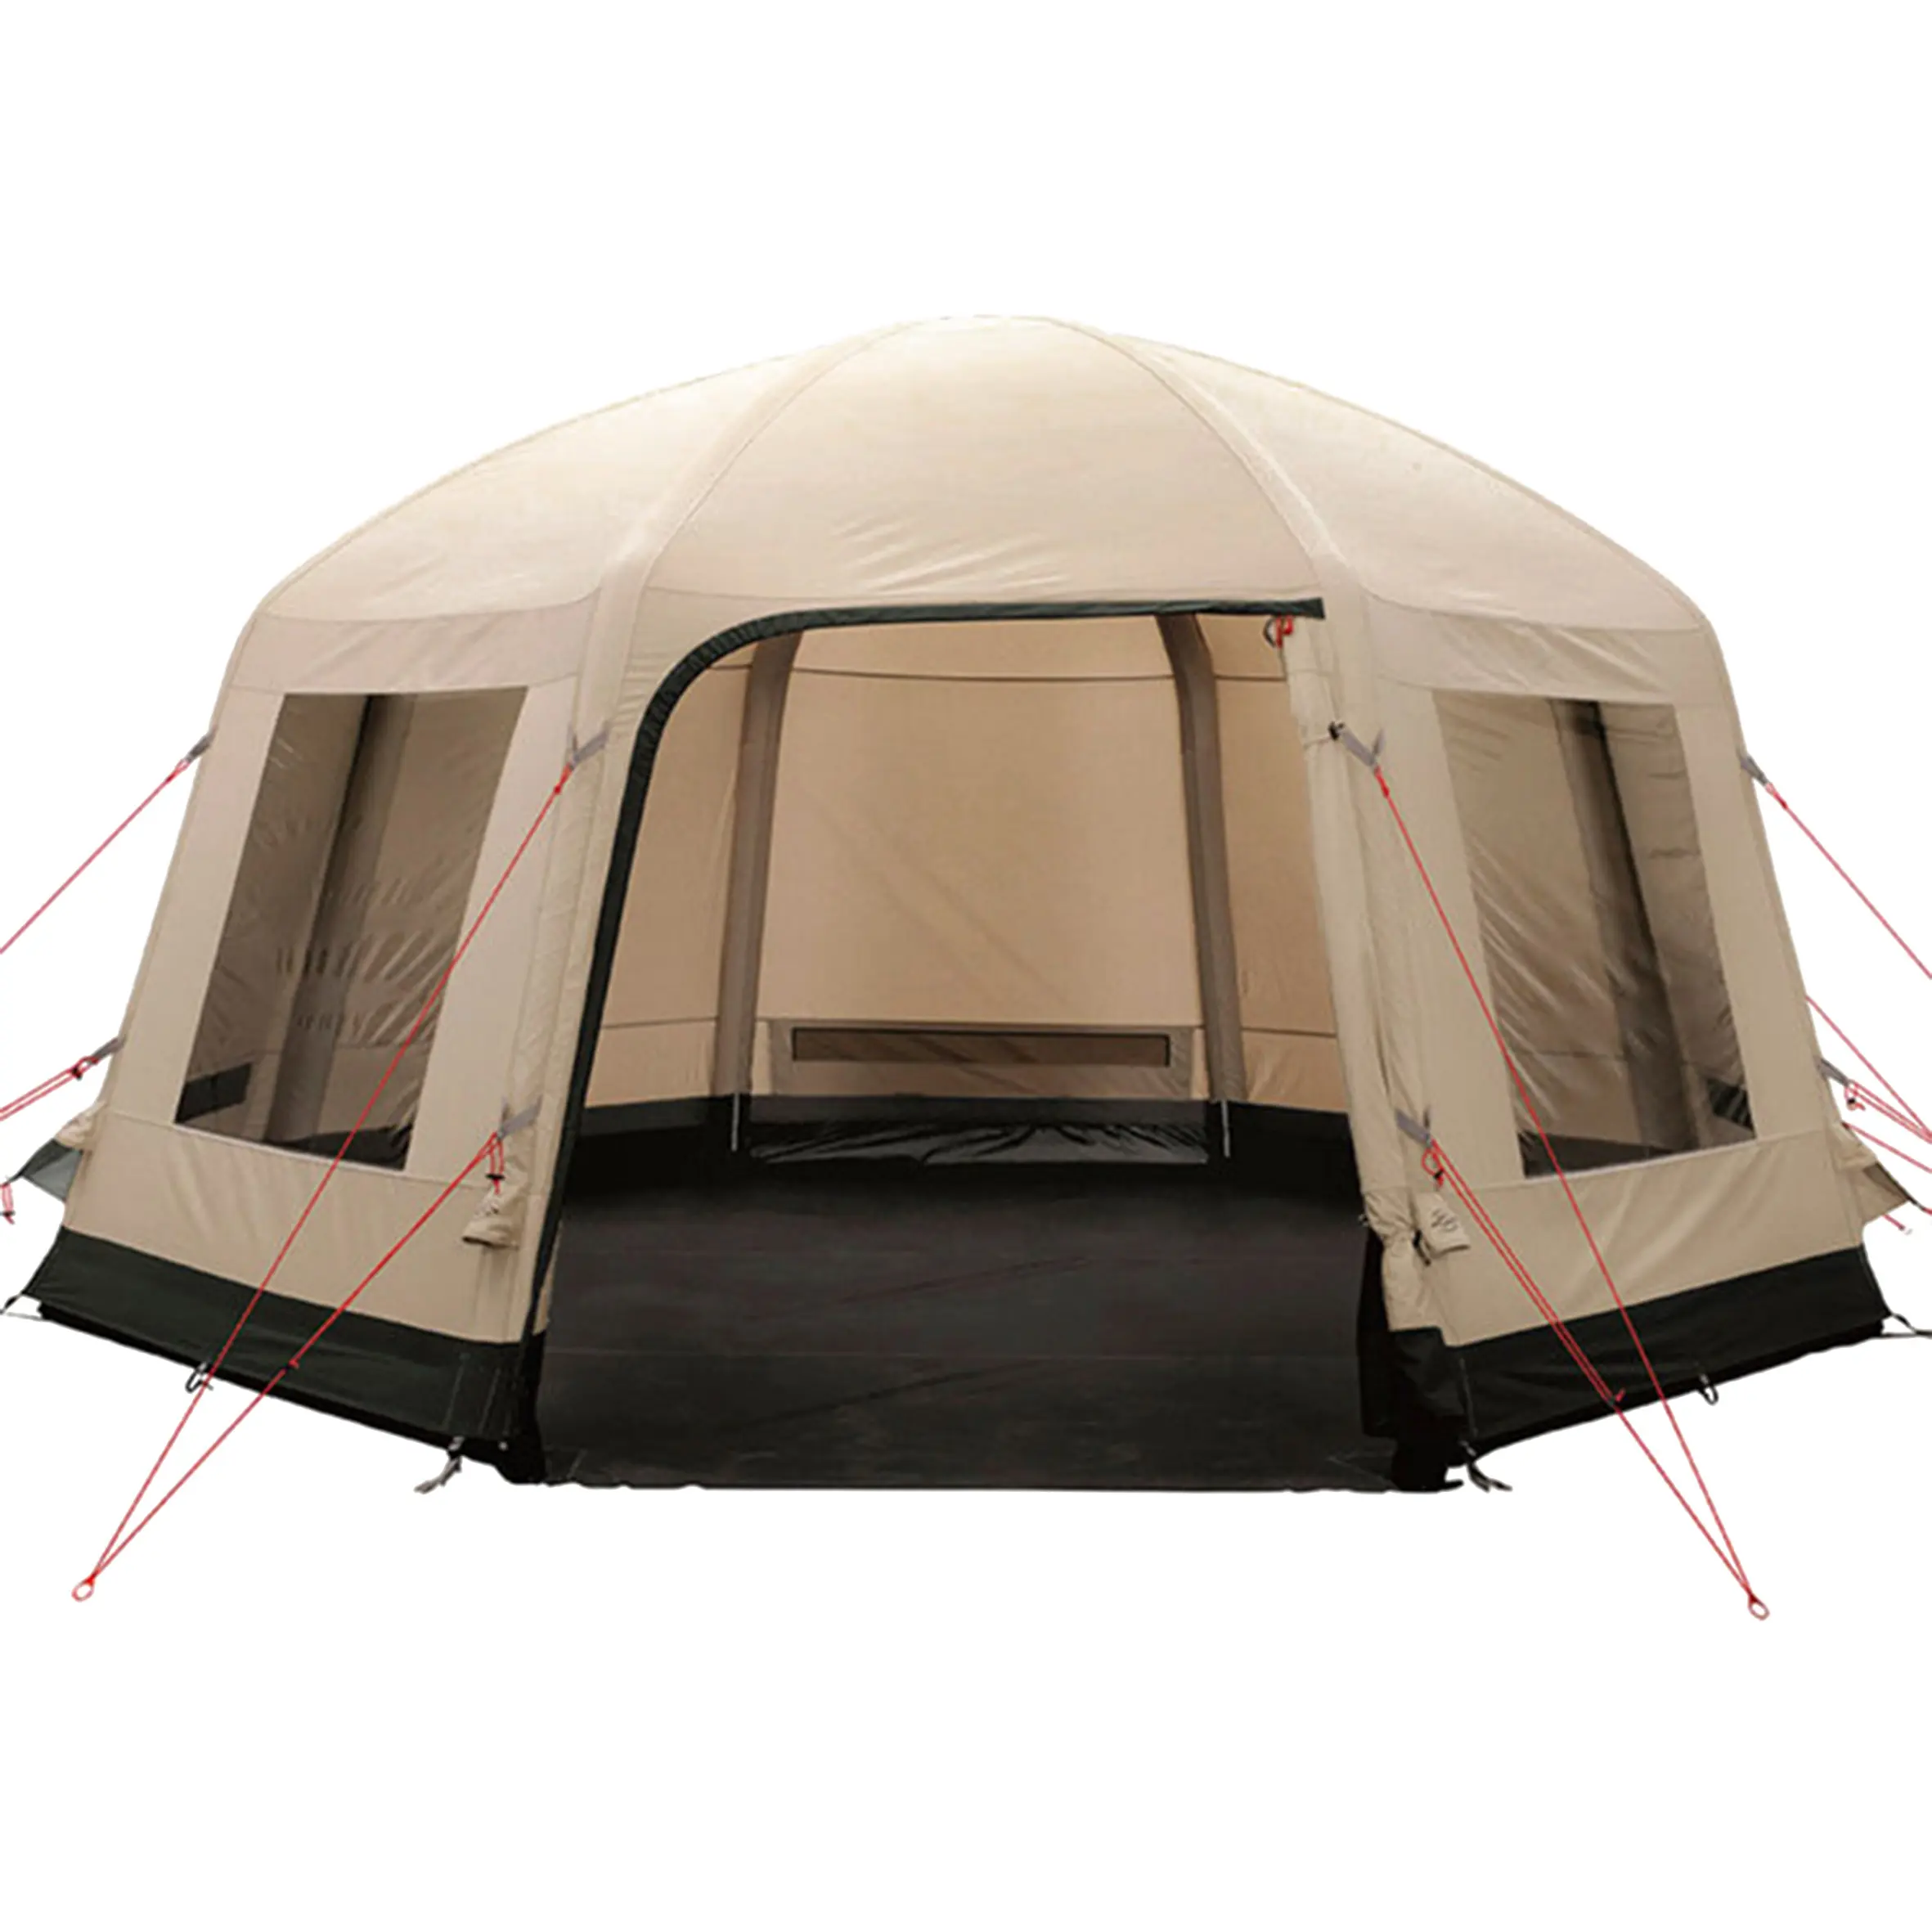 Suitable for all scenes of the yurt and 100 cotton,outdoor camping tents family travelling yurt for camping tentss/